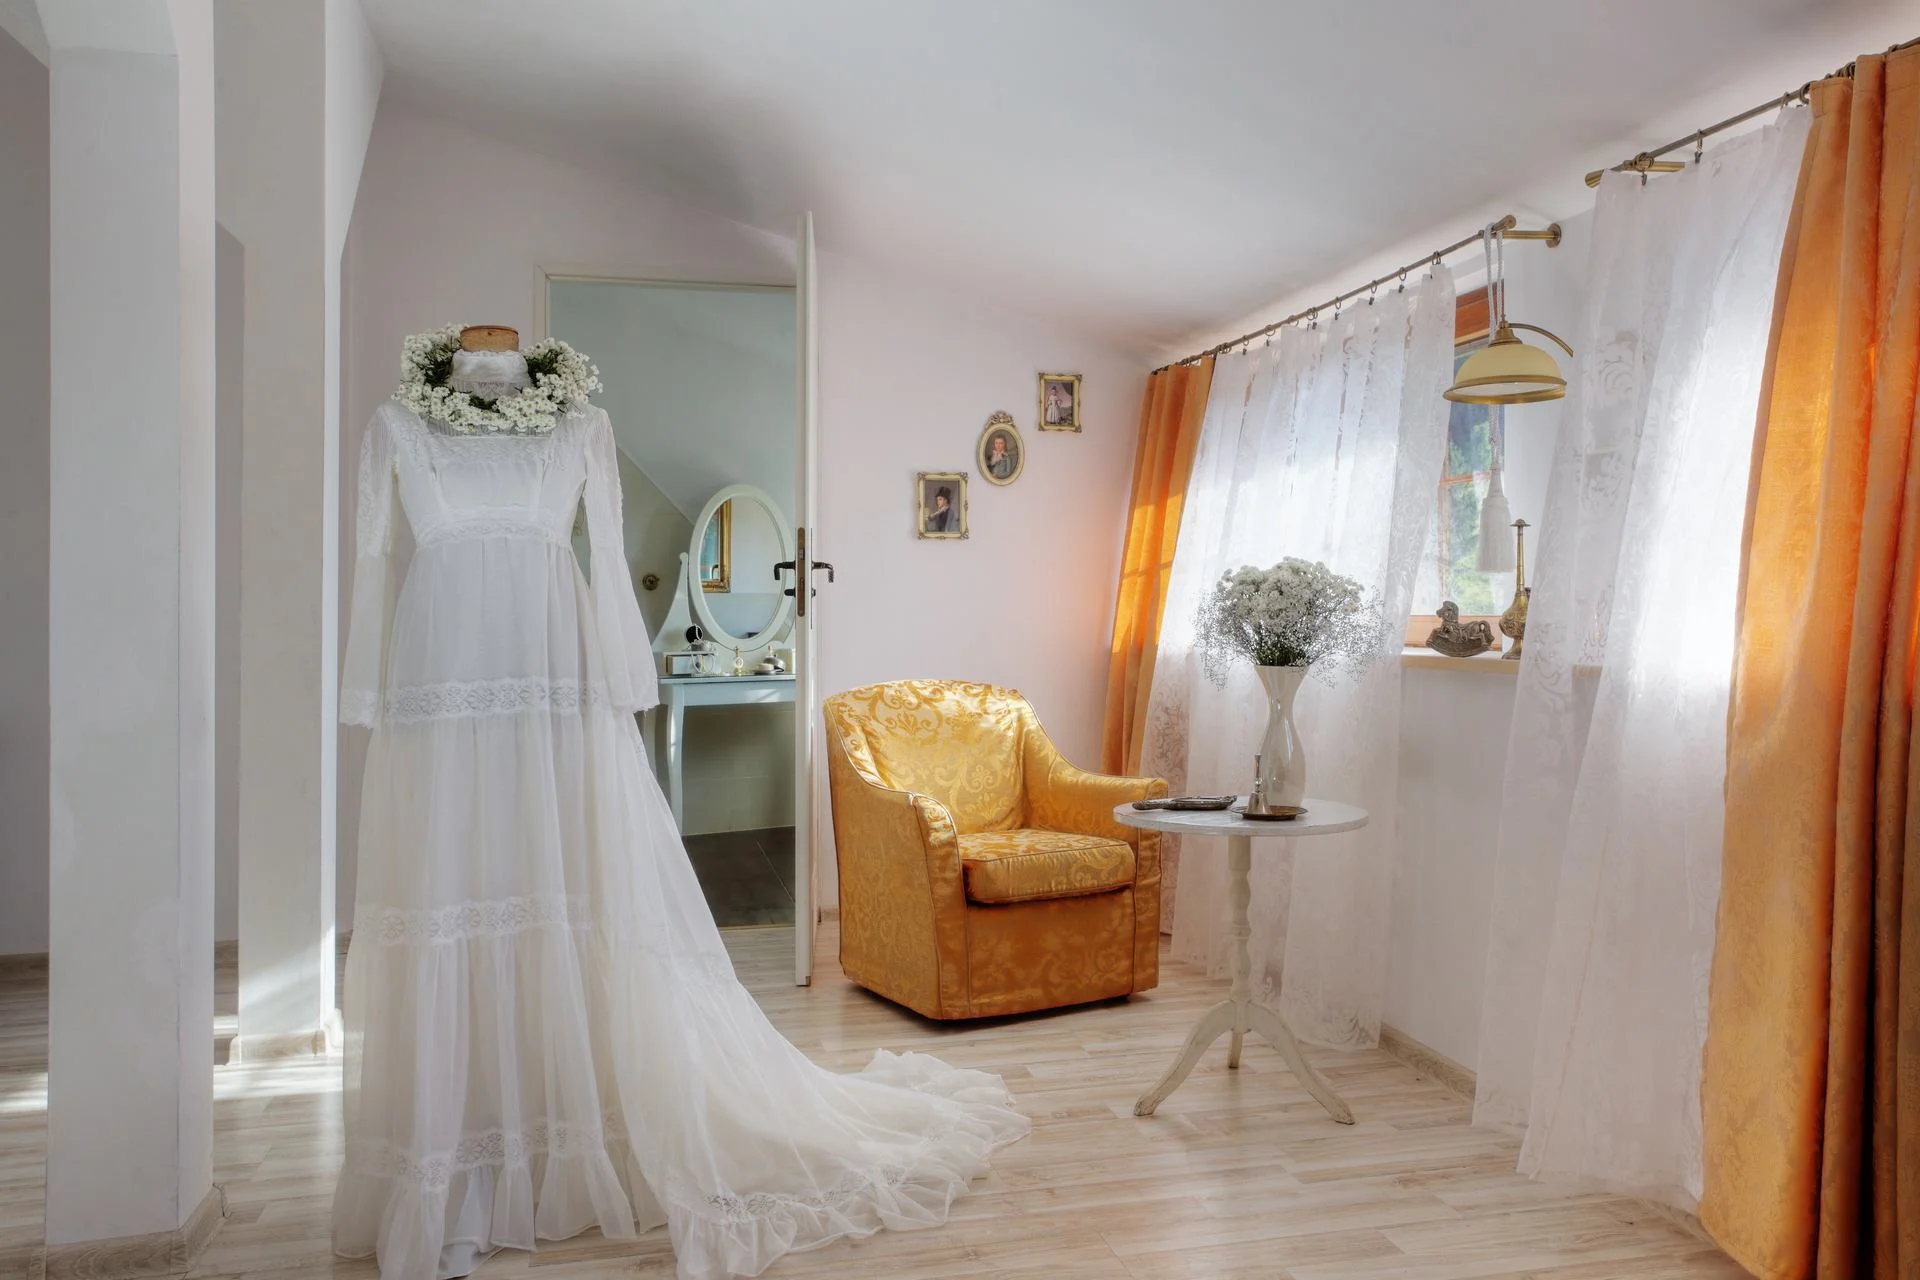 golden suite, suite for the bride and groom, luxury hotel room with bathroom and bathtub